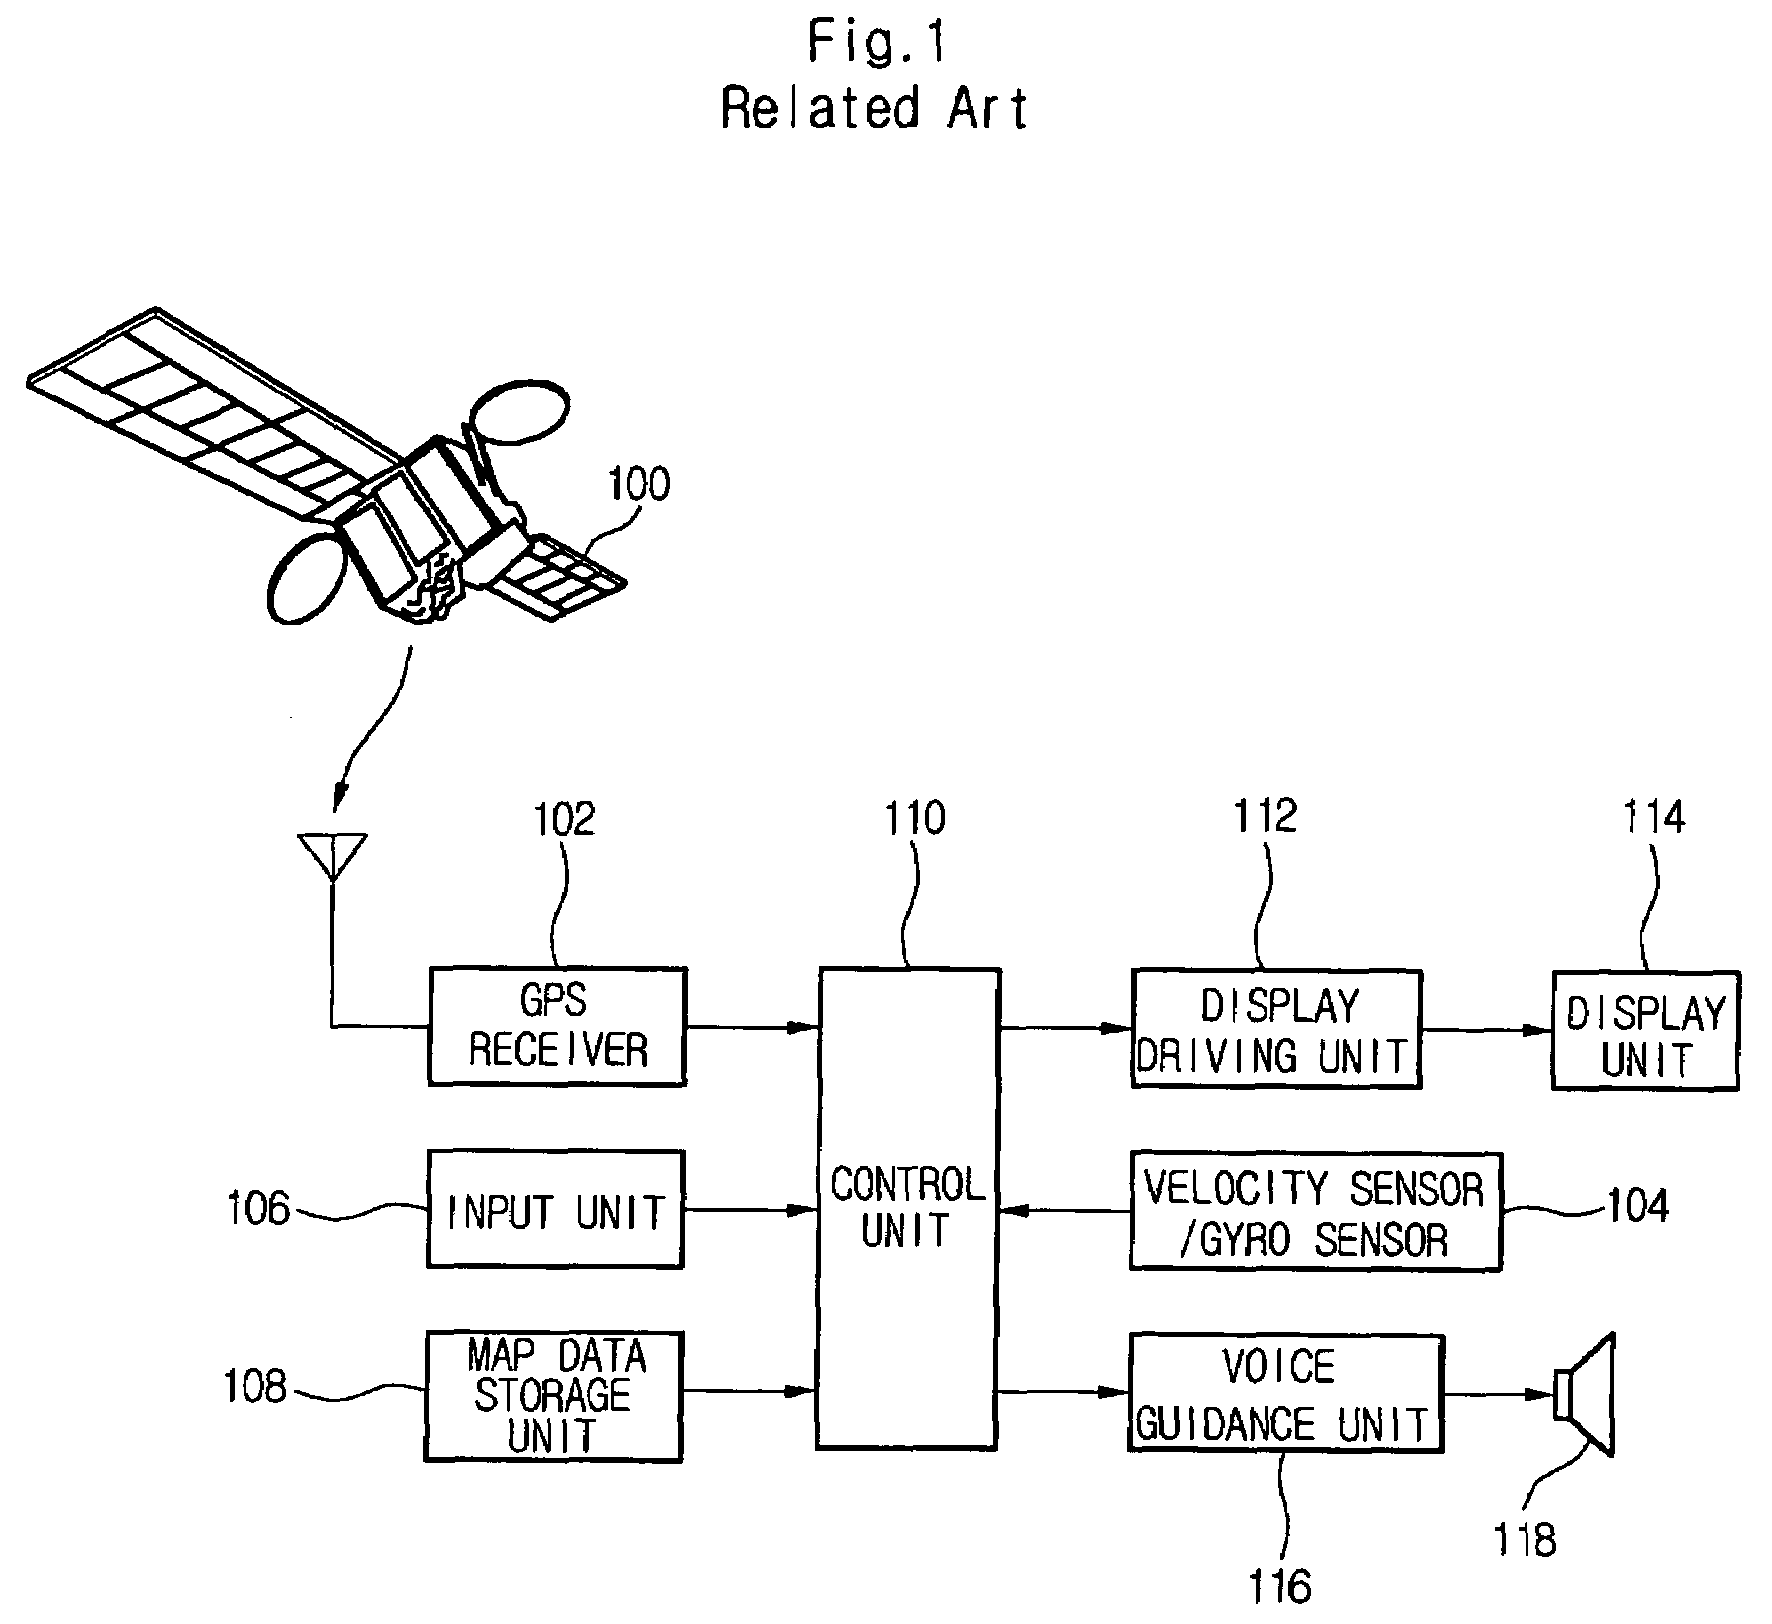 Device and method for traffic information guiding in navigation system